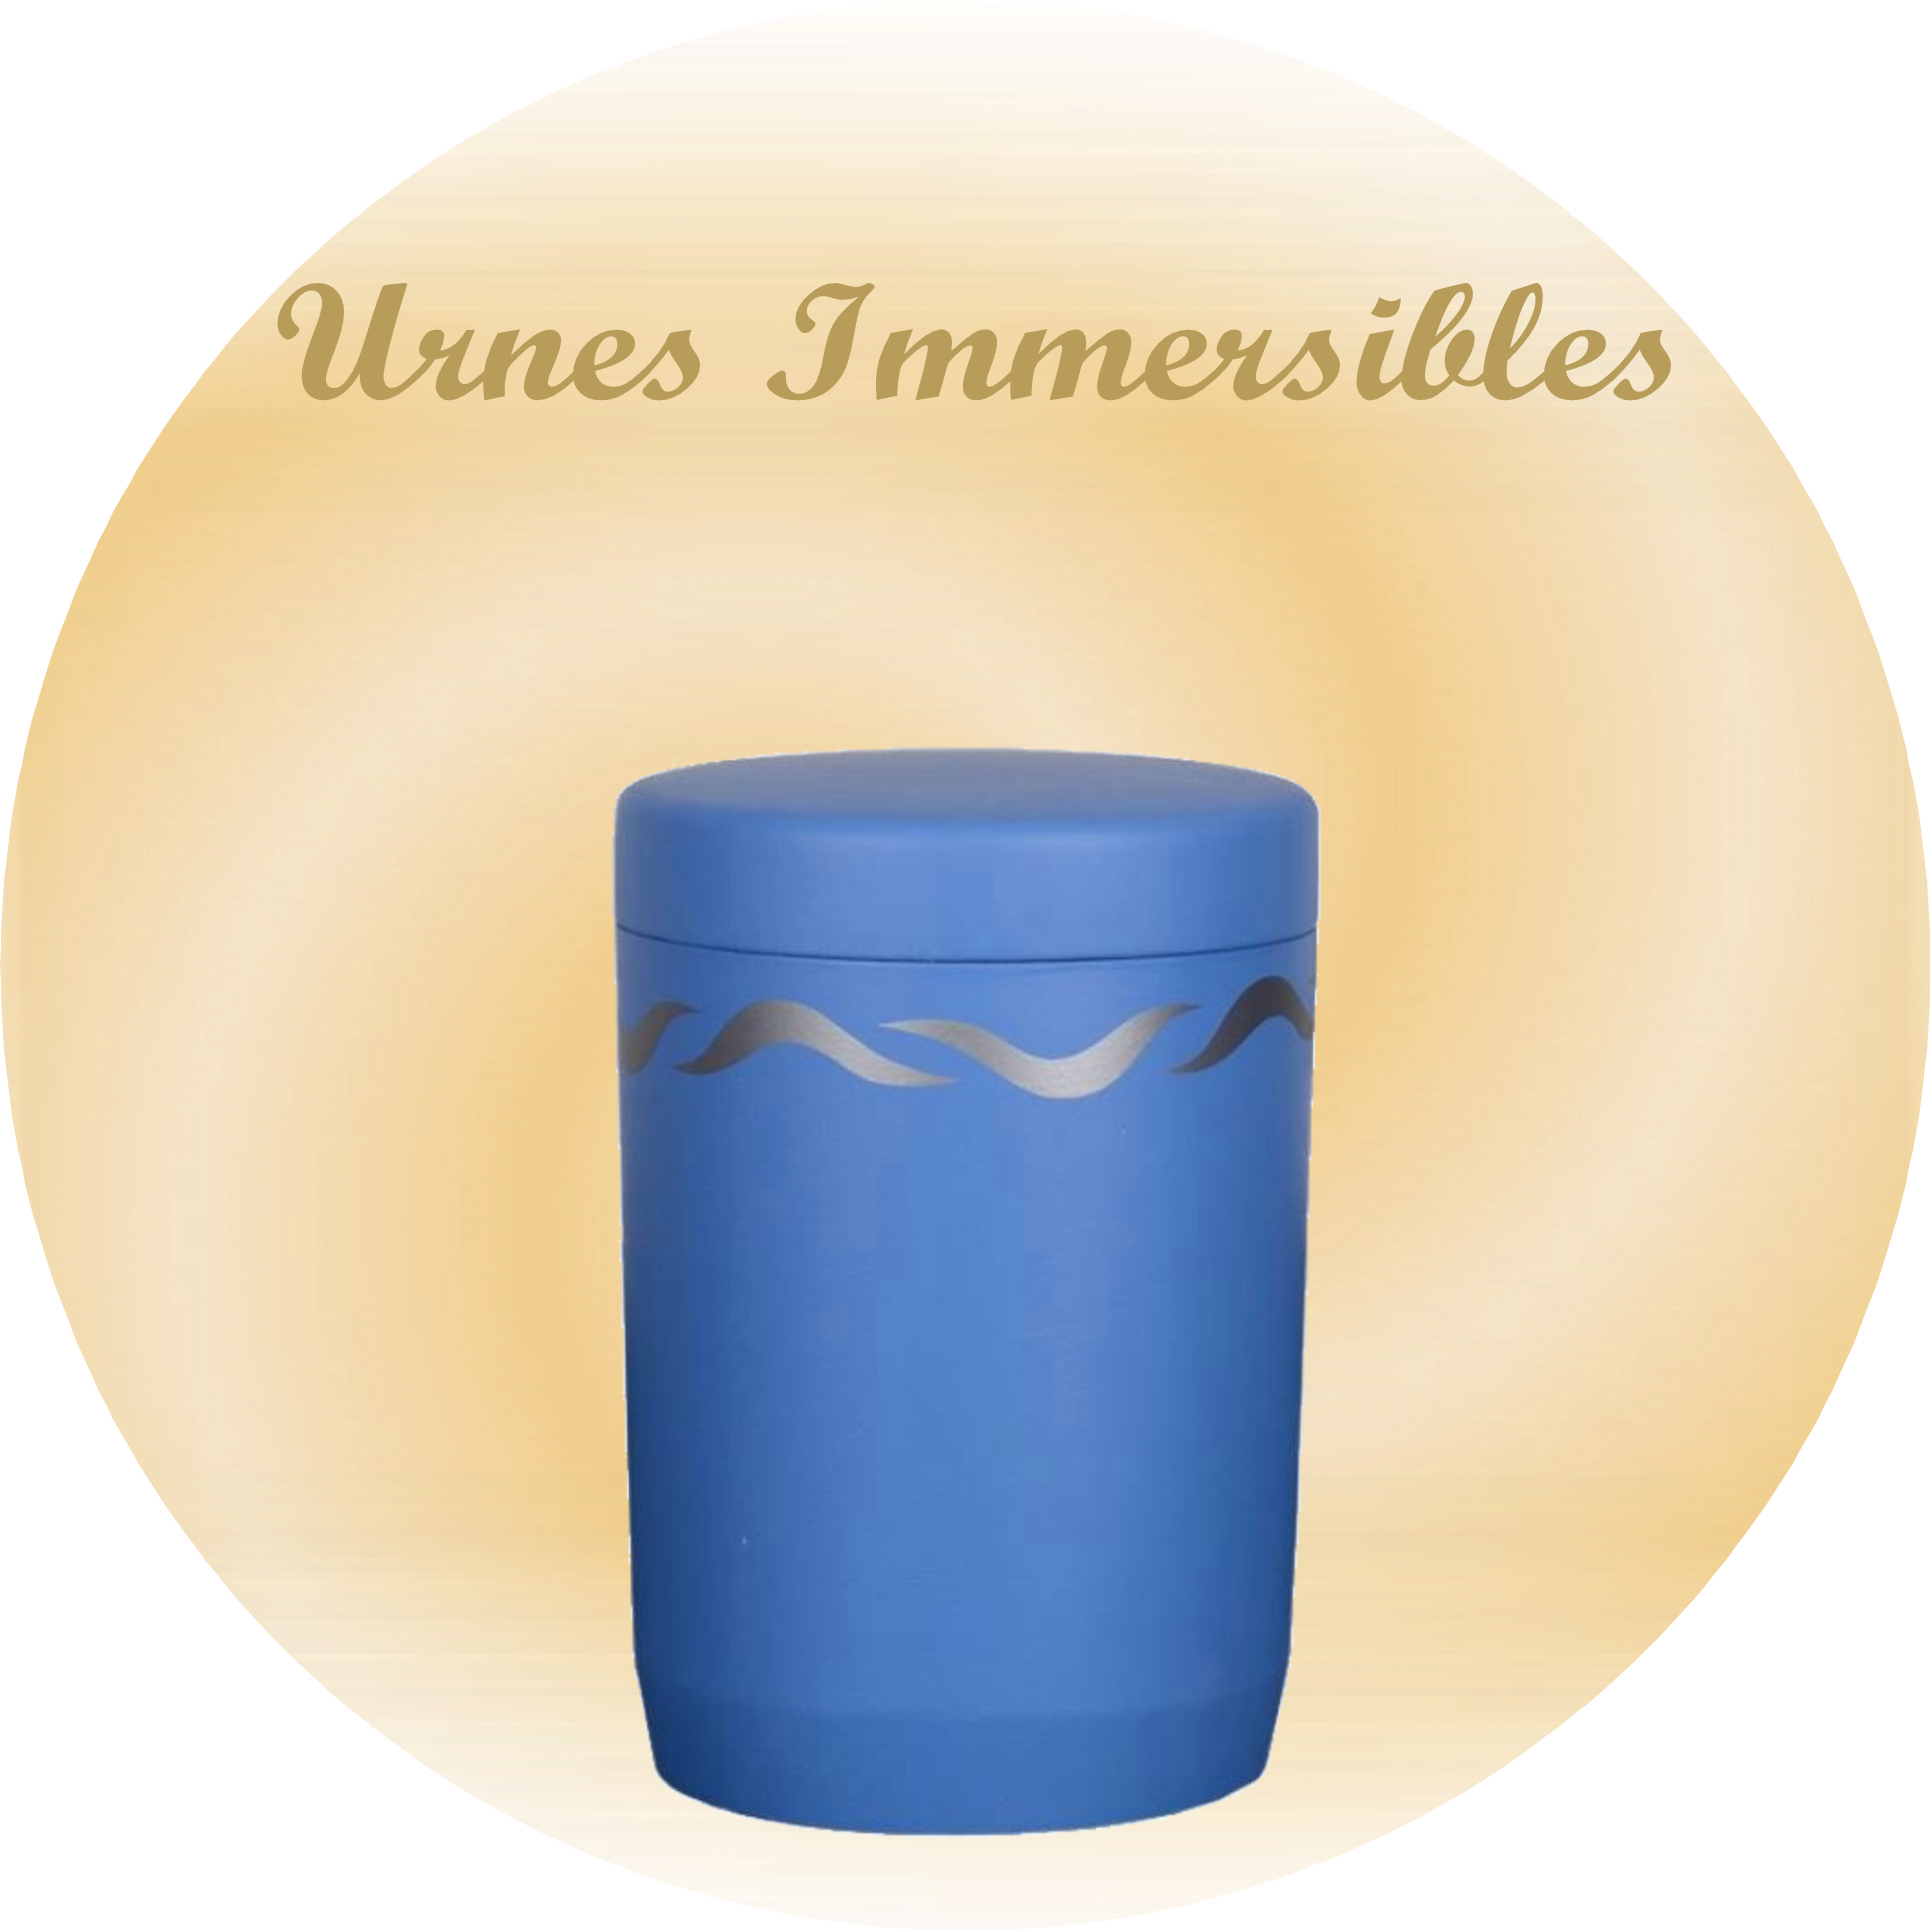 URNE FUNERAIRE IMMERSIBLE LANSAC